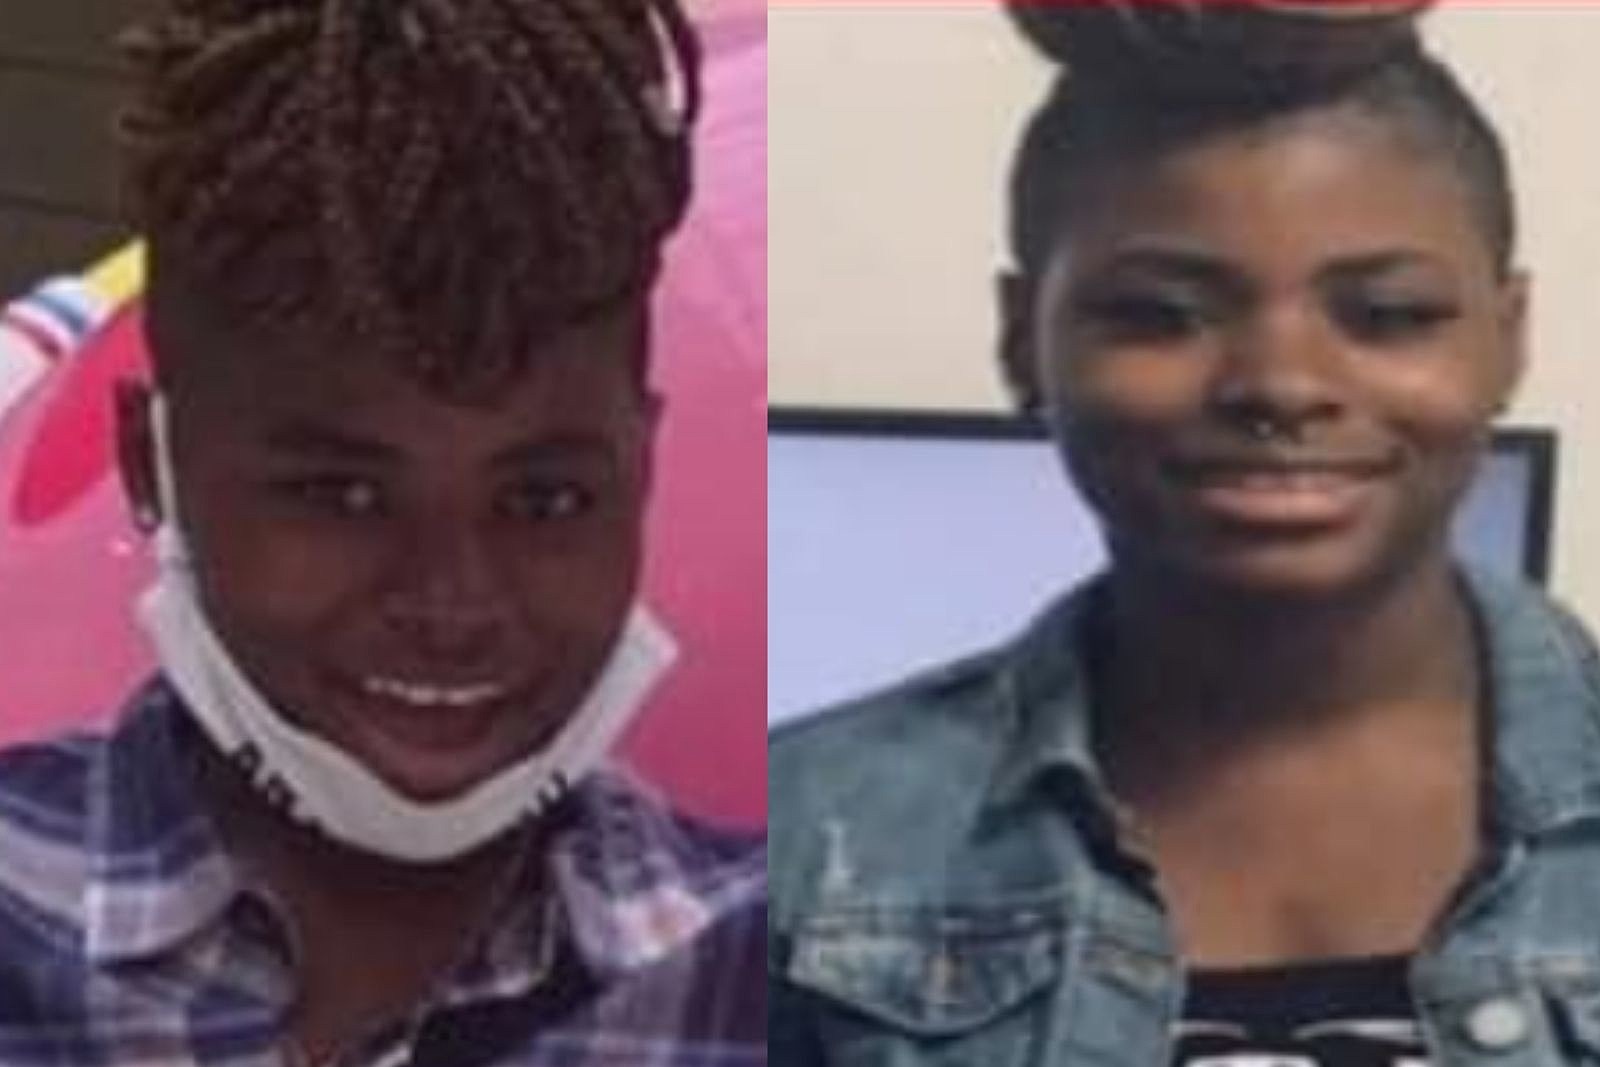 Missing 14-year-old NJ girl was with a man on surveillance video